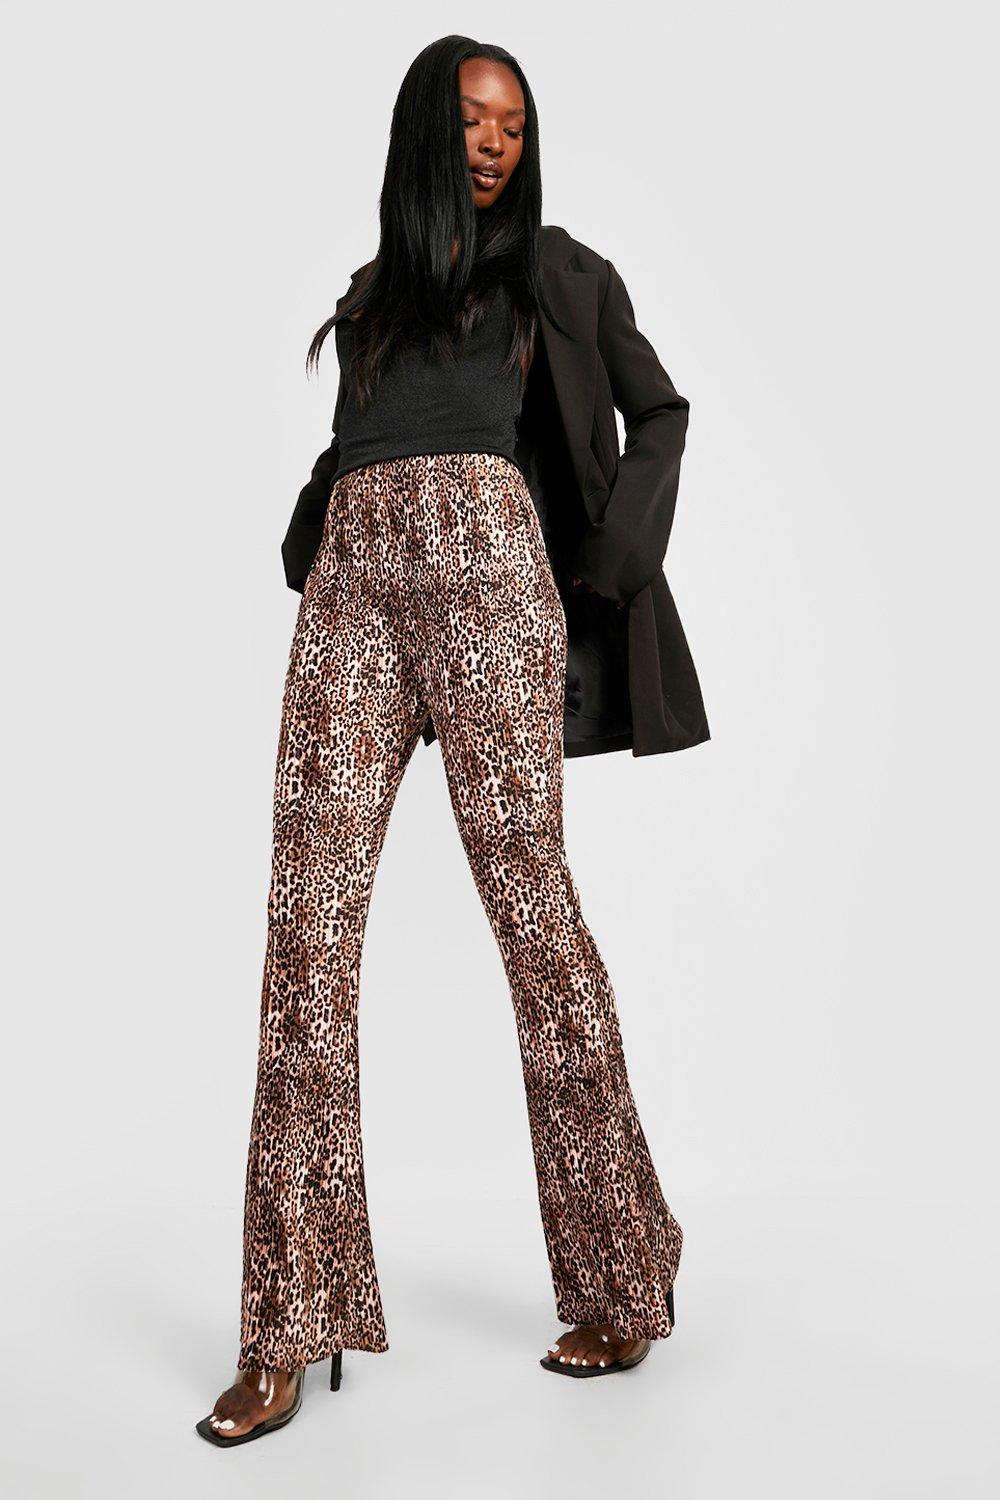 Extreme flare leopard print pants (with gusset) : r/sewing